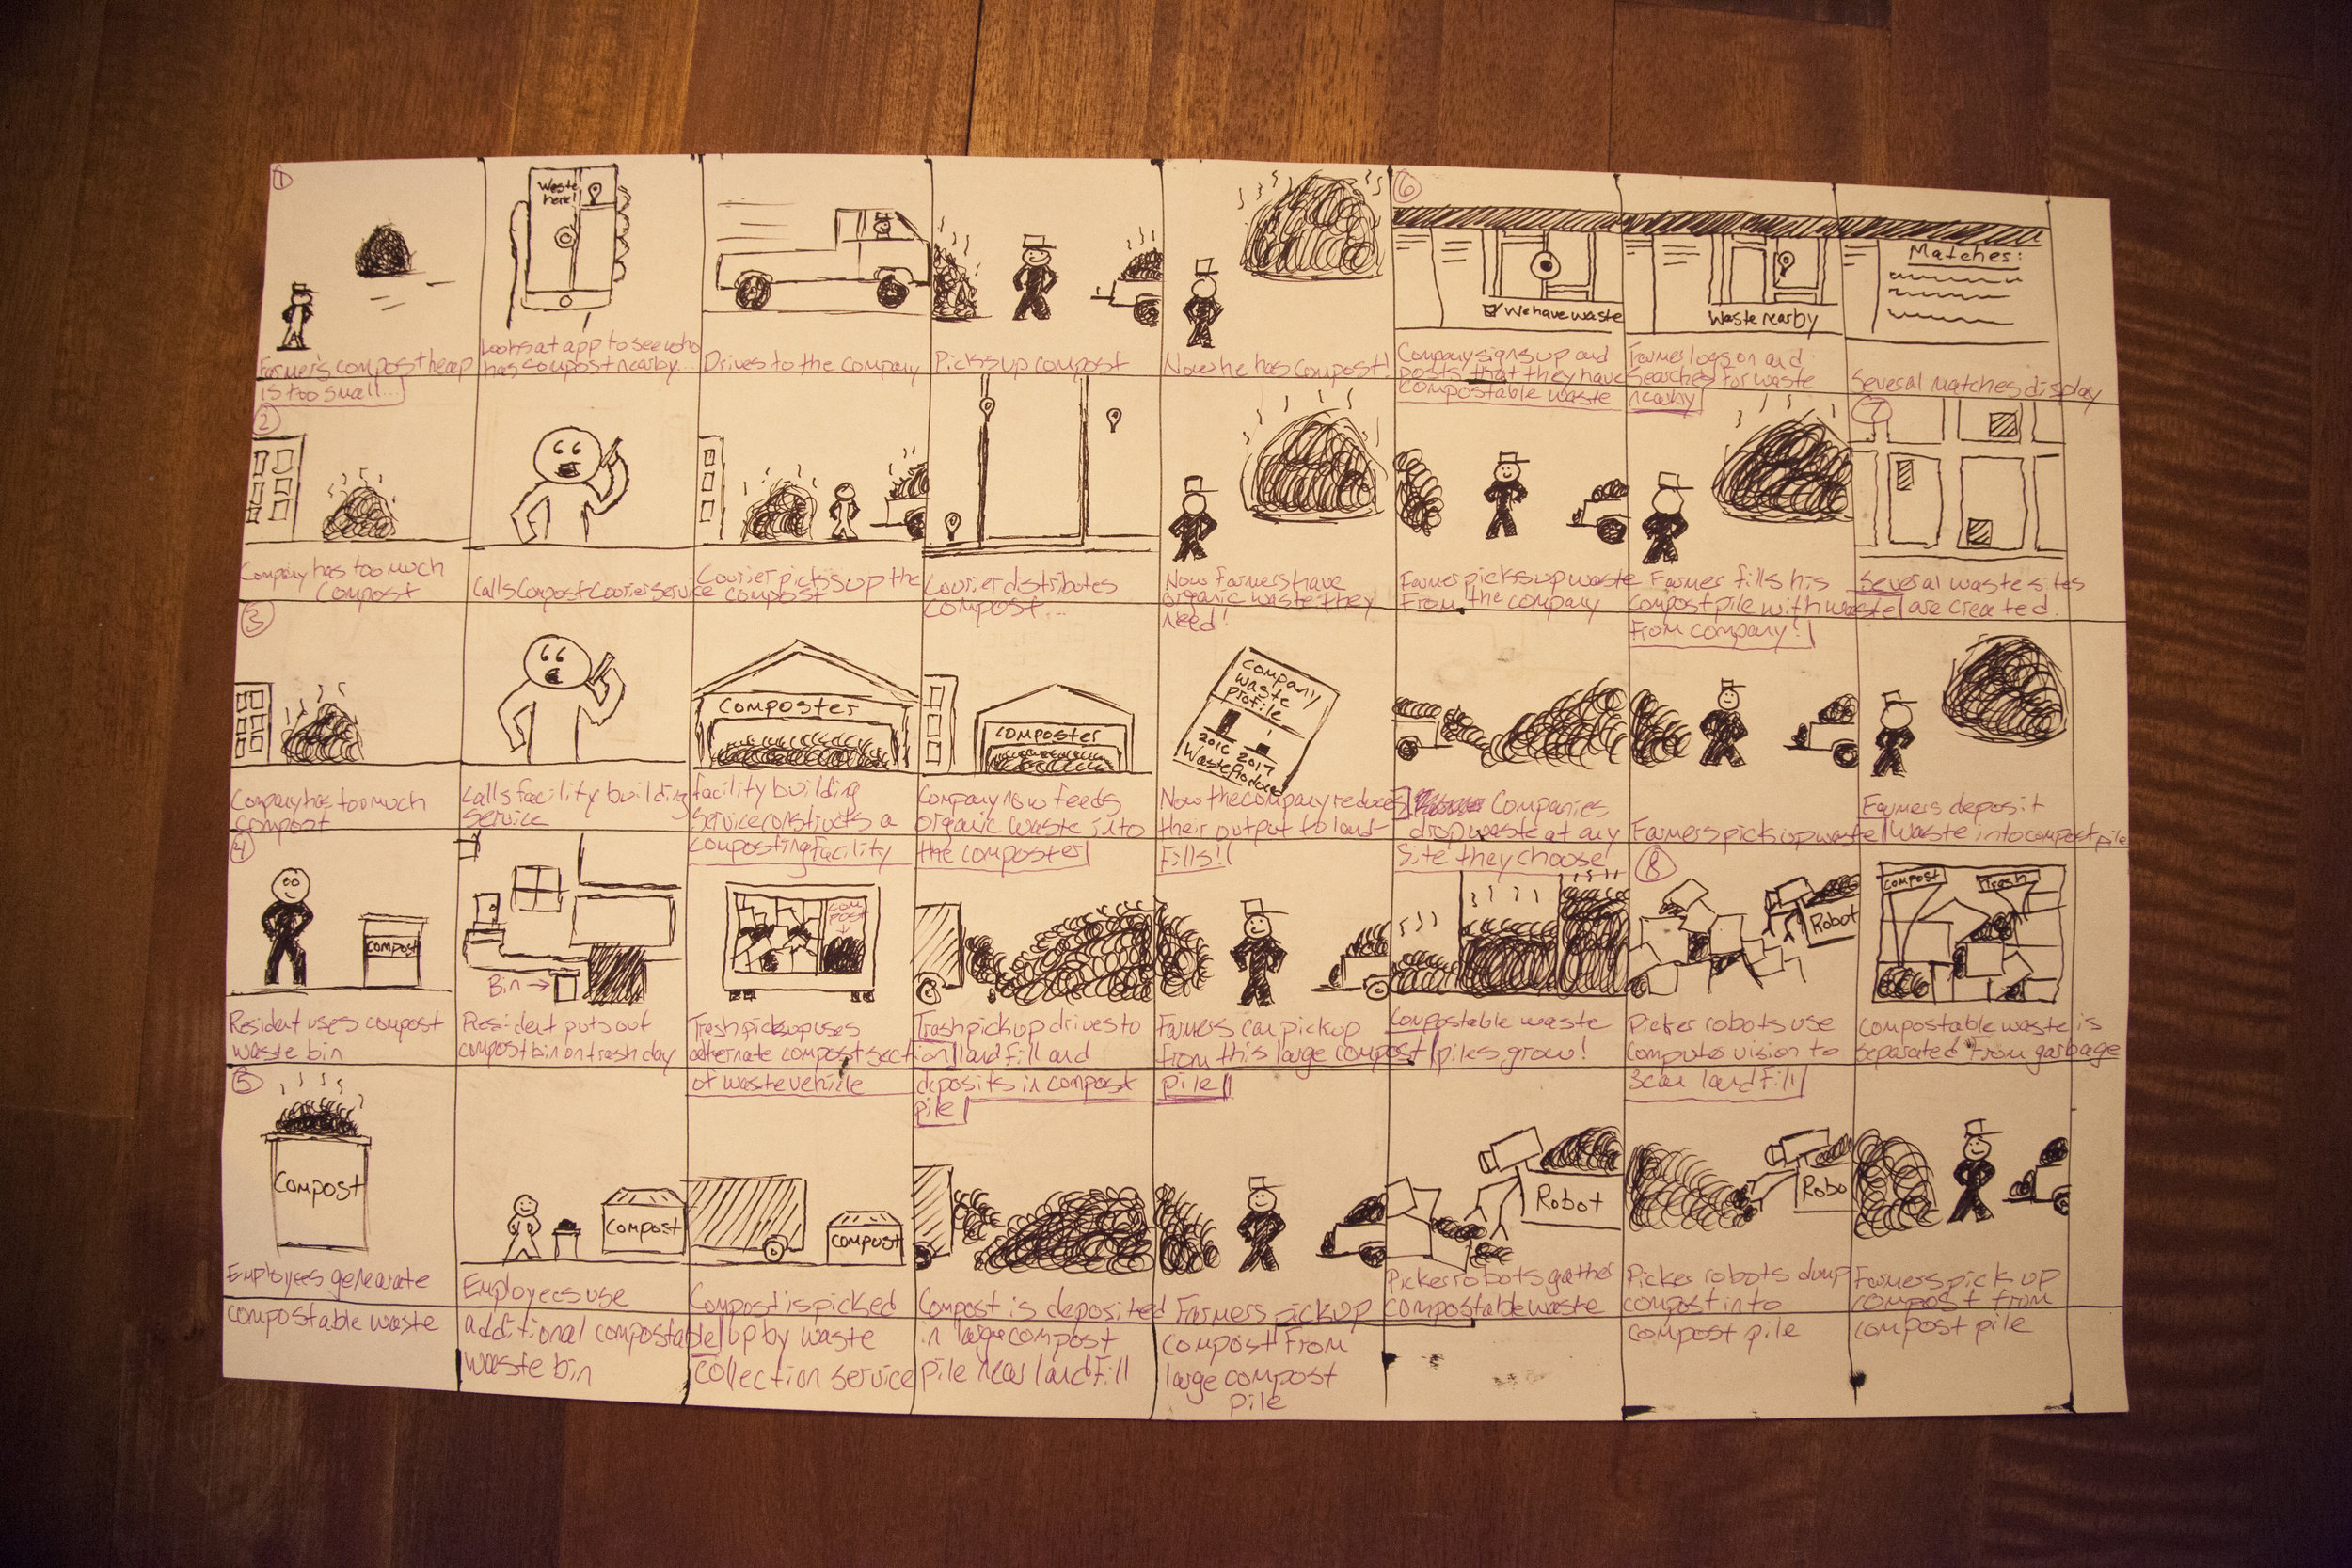 Storyboards illustrating compost business ideas